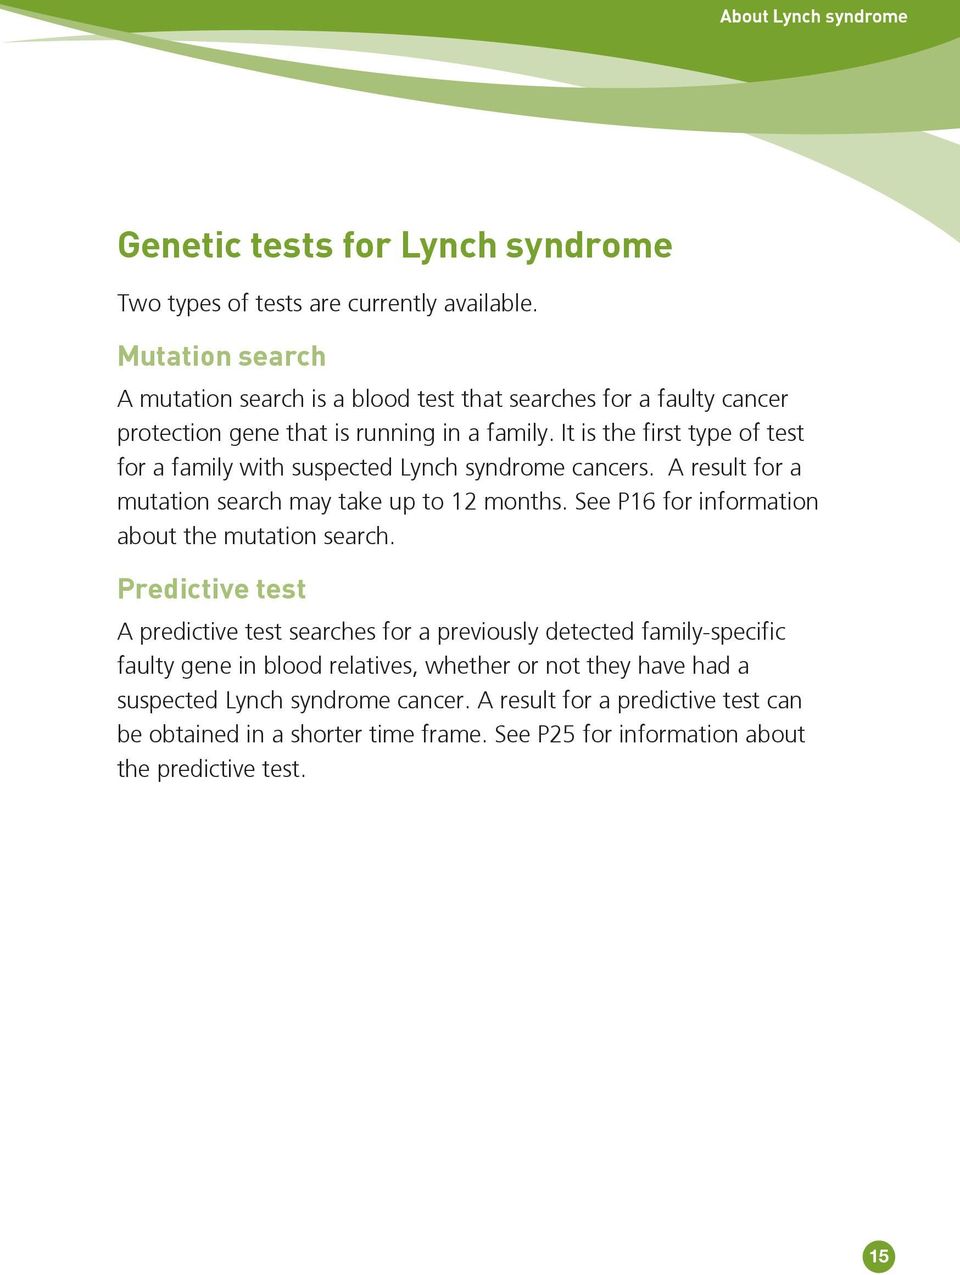 It is the first type of test for a family with suspected Lynch syndrome cancers. A result for a mutation search may take up to 12 months.